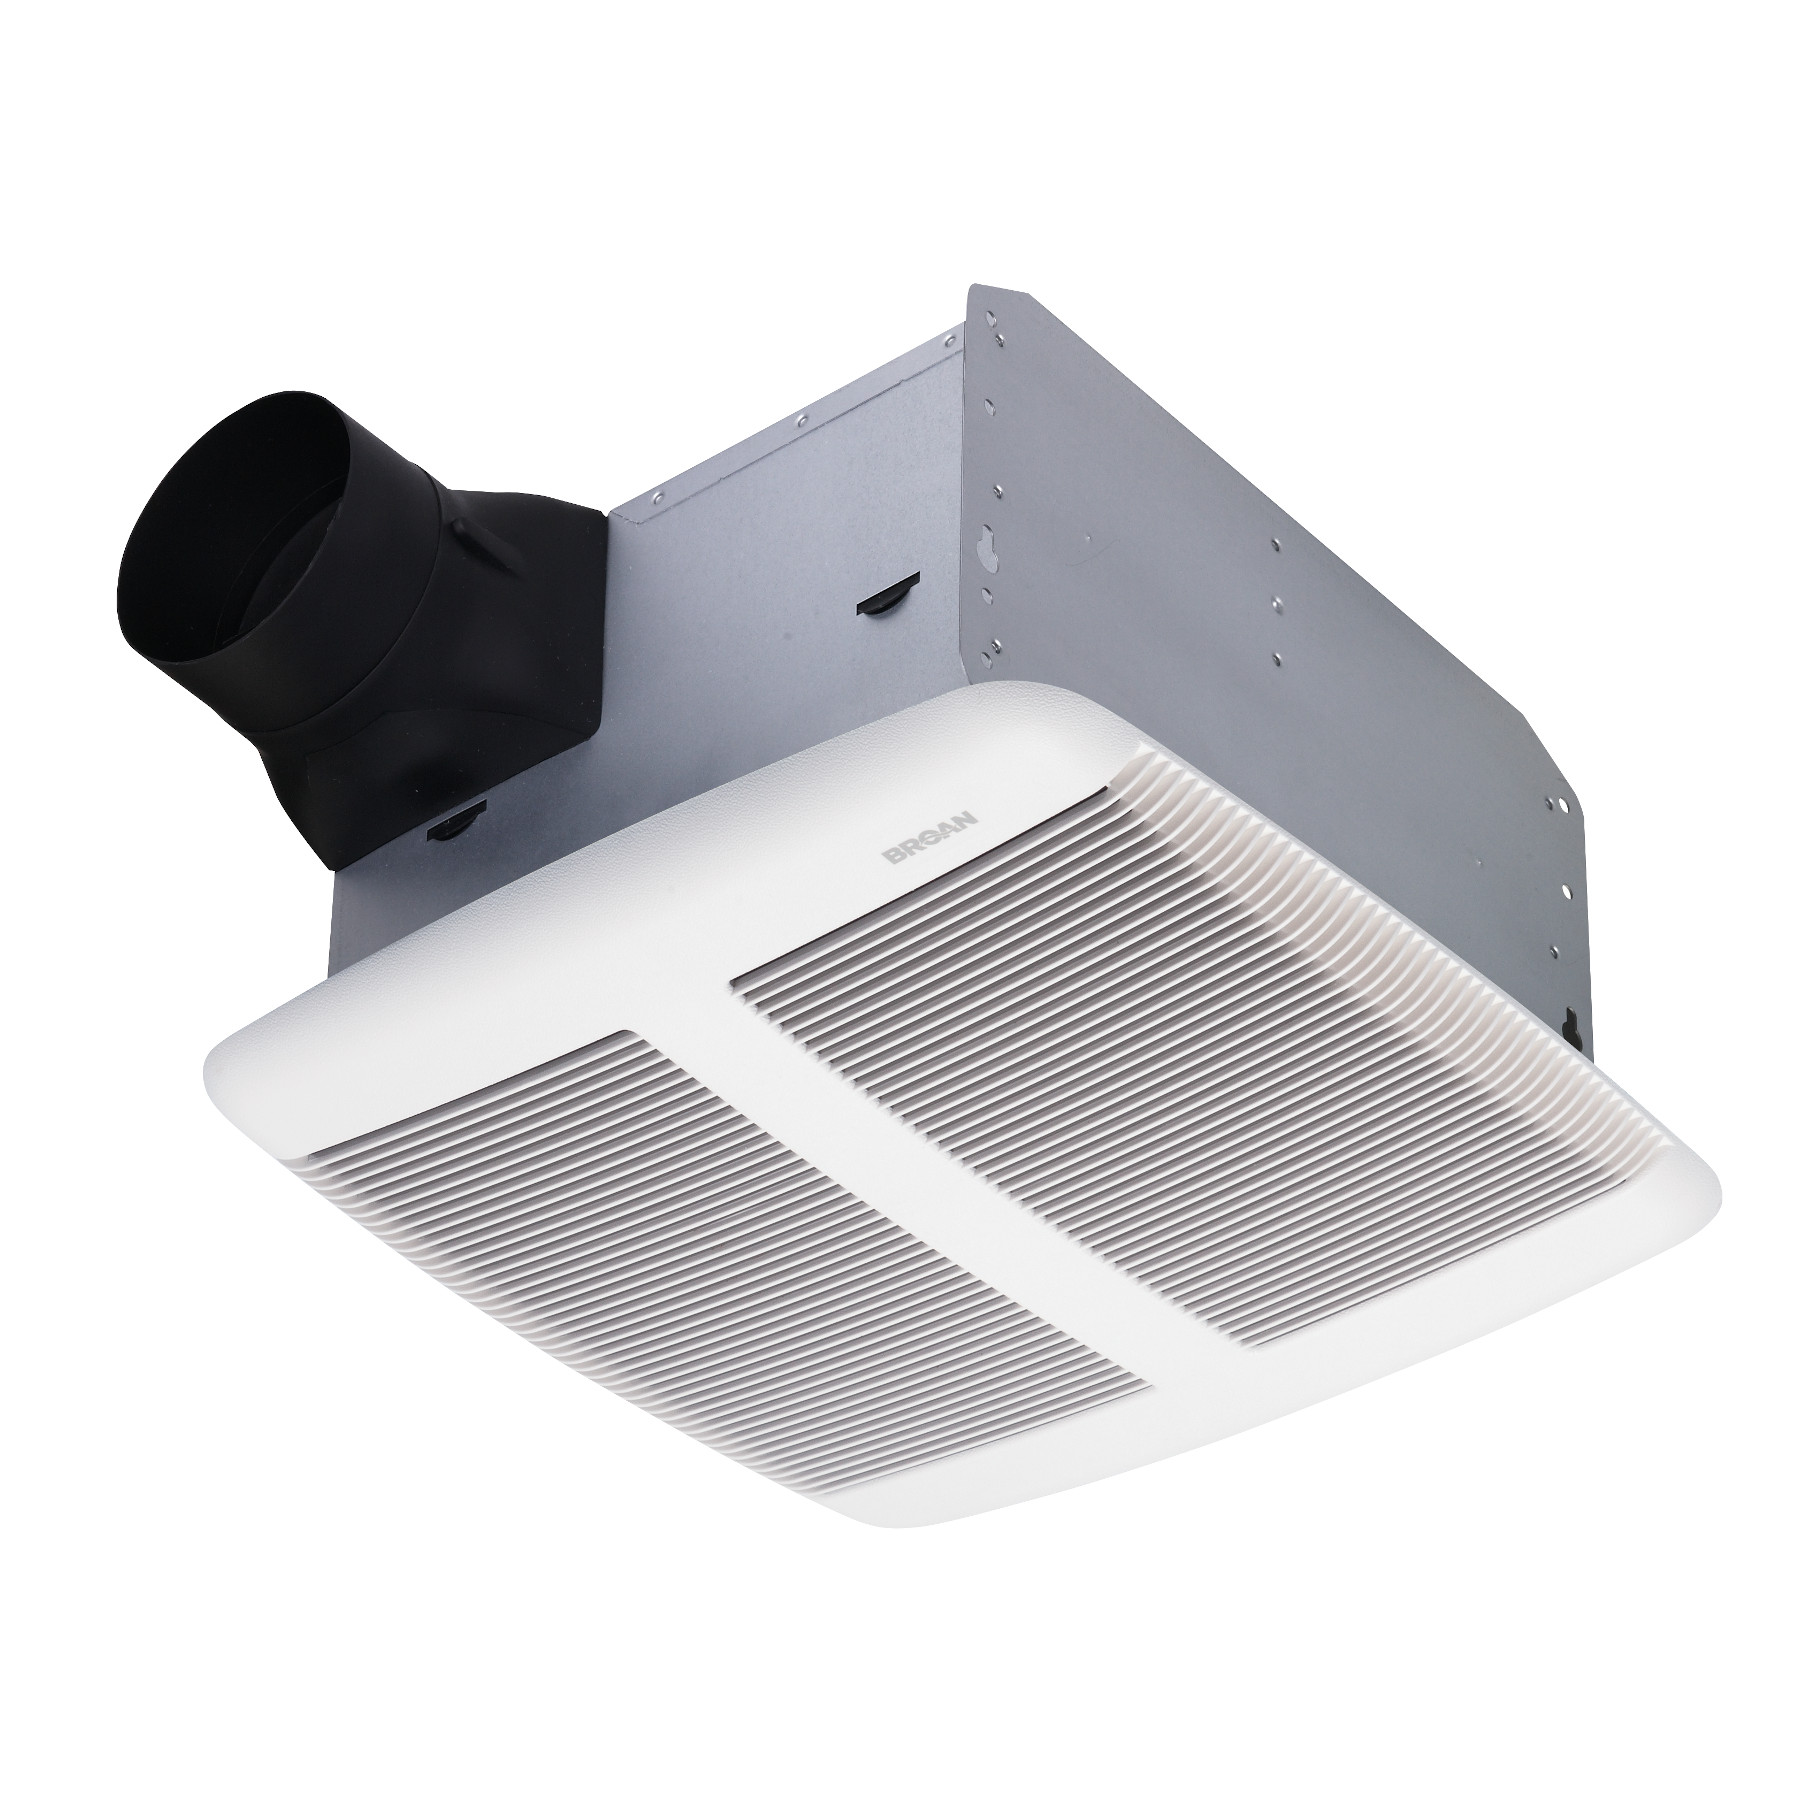 Sensonic 110 CFM Ceiling Bathroom Exhaust Fan with Speaker and Bluetooth® Wireless Technology, ENERGY STAR*